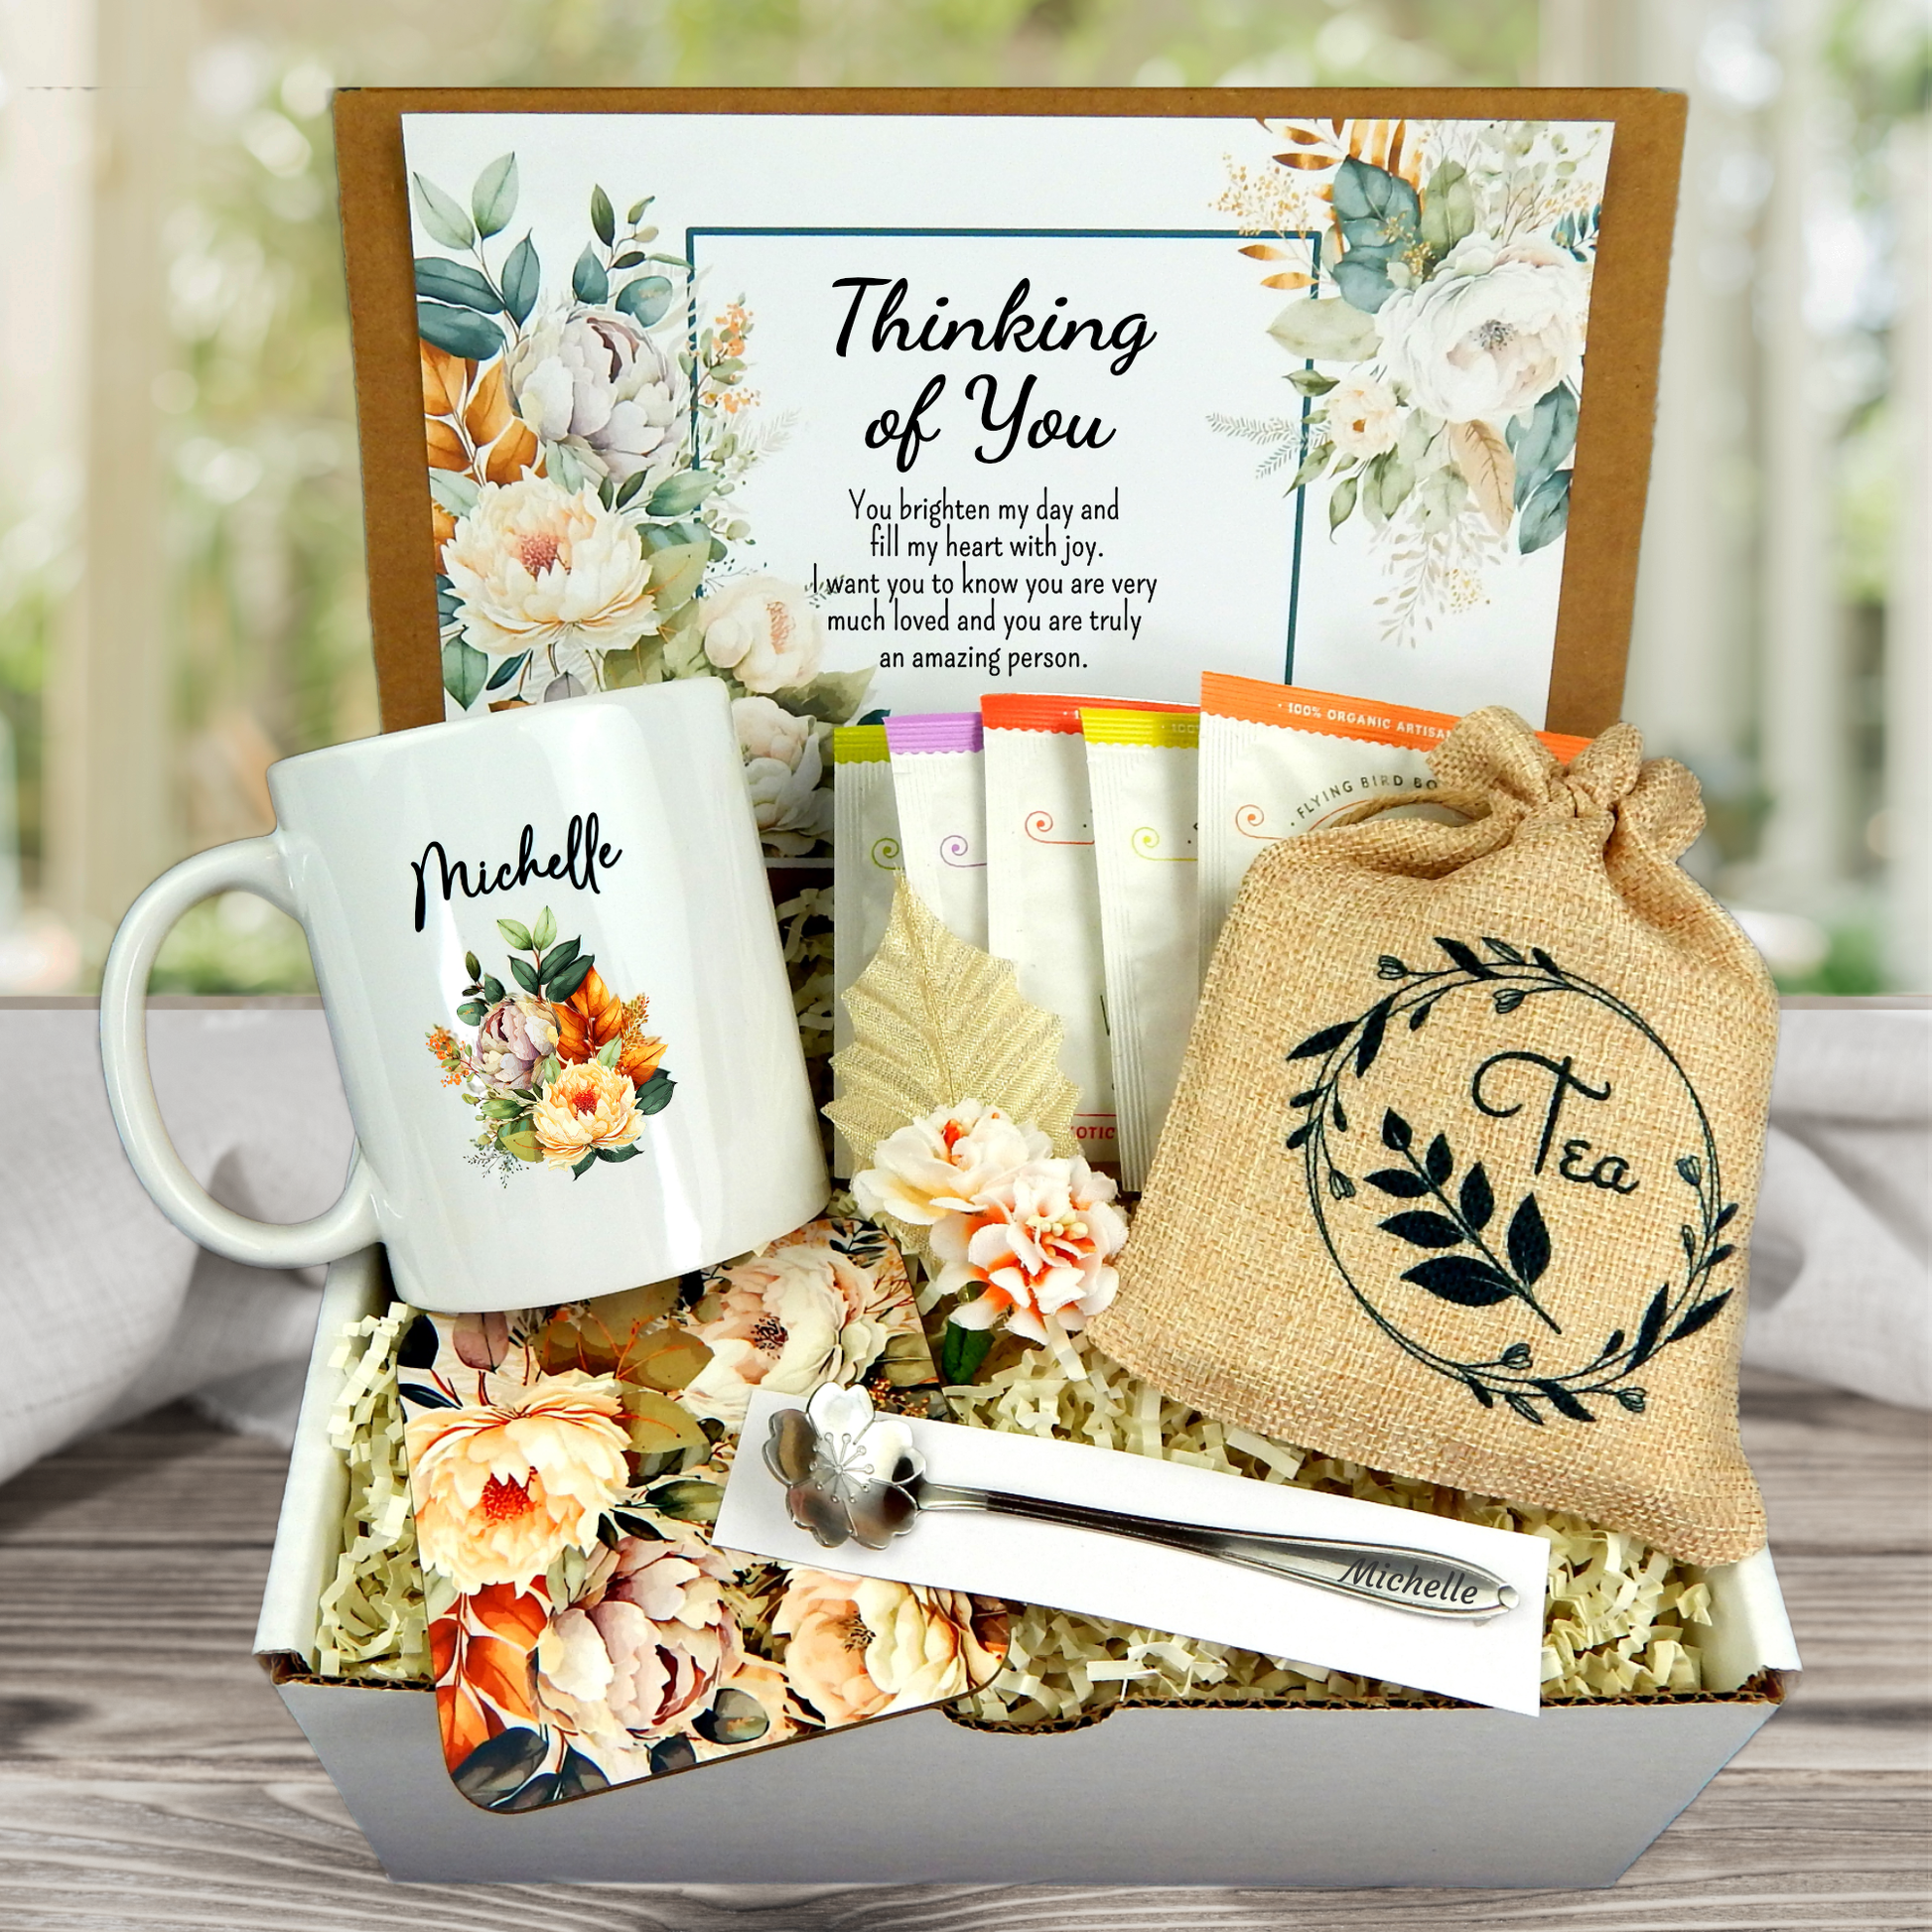 Thinking of you gift for  Tea lover's gift basket, custom mug with engraving, coaster, meaningful card, vintage floral motif